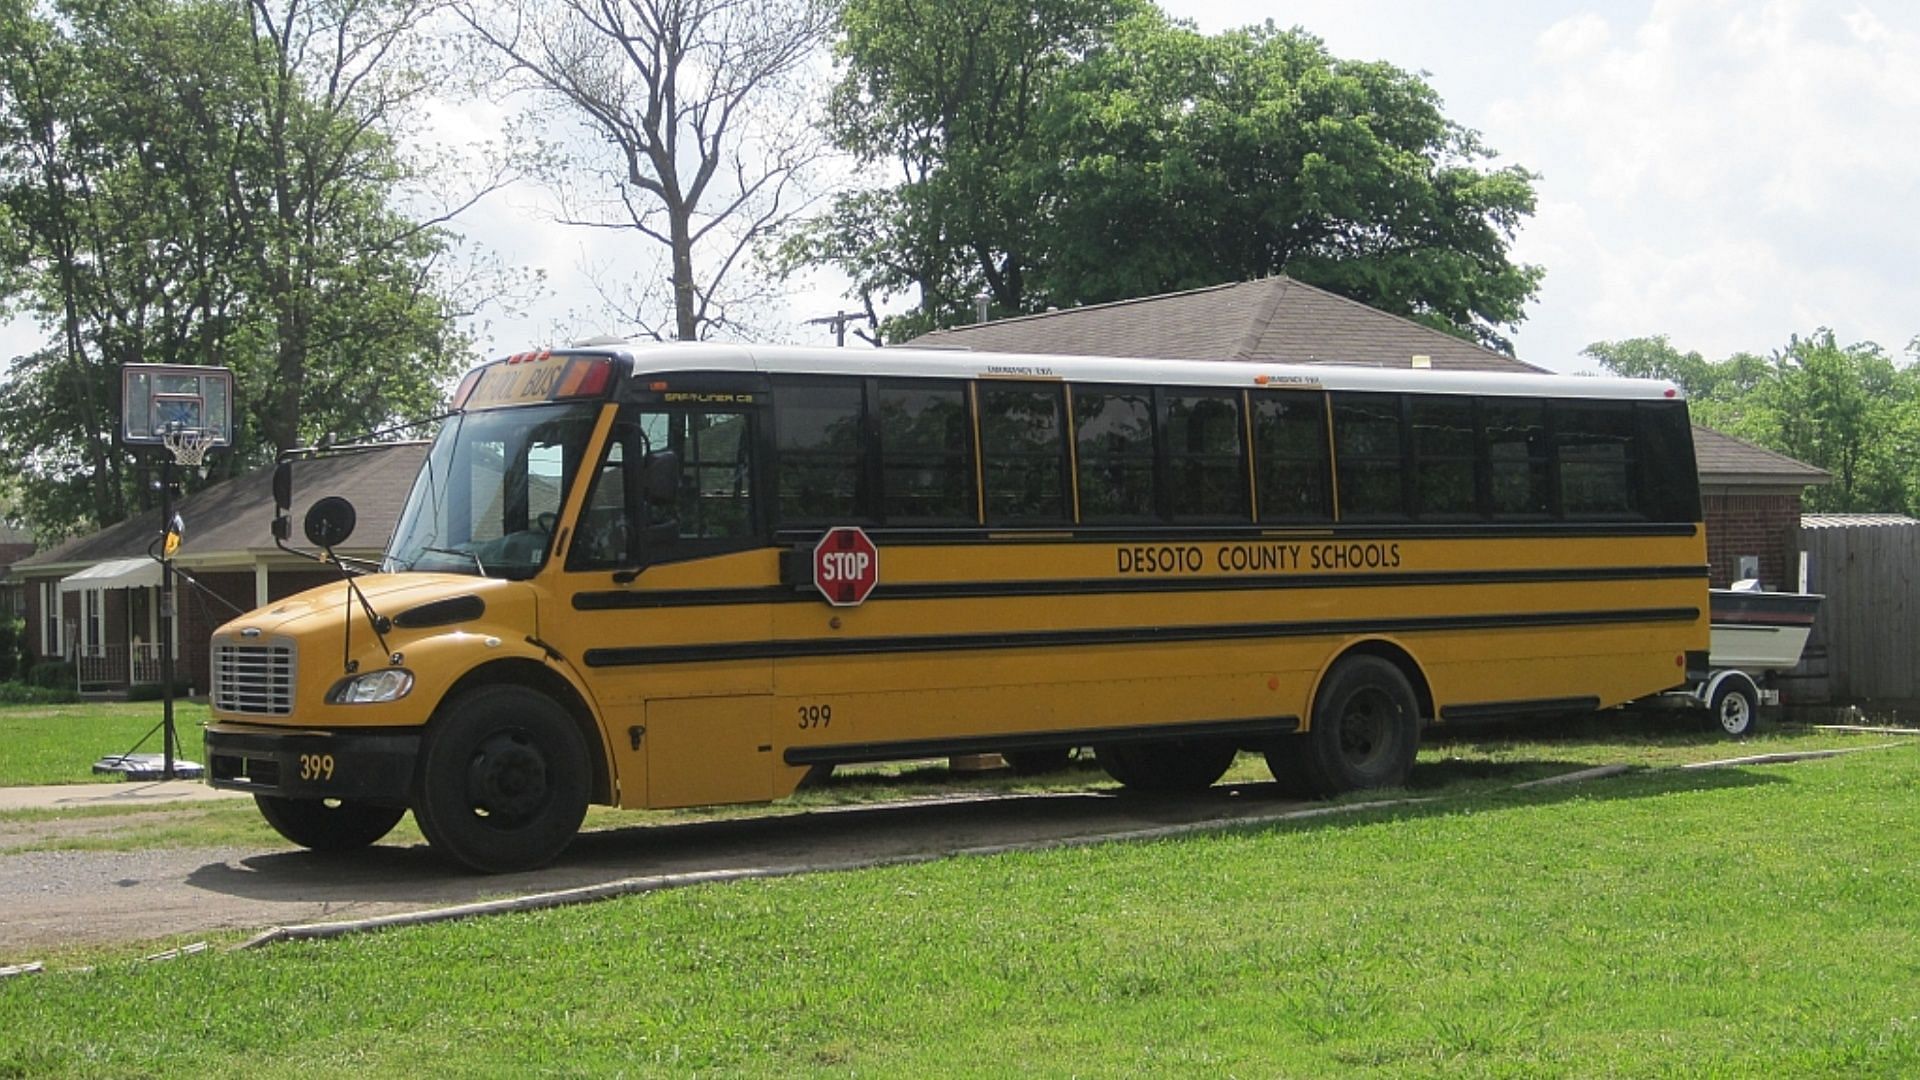 A school bus driver from DeSoto County detained children recently. (Image via Facebook/DeSoto County School District)